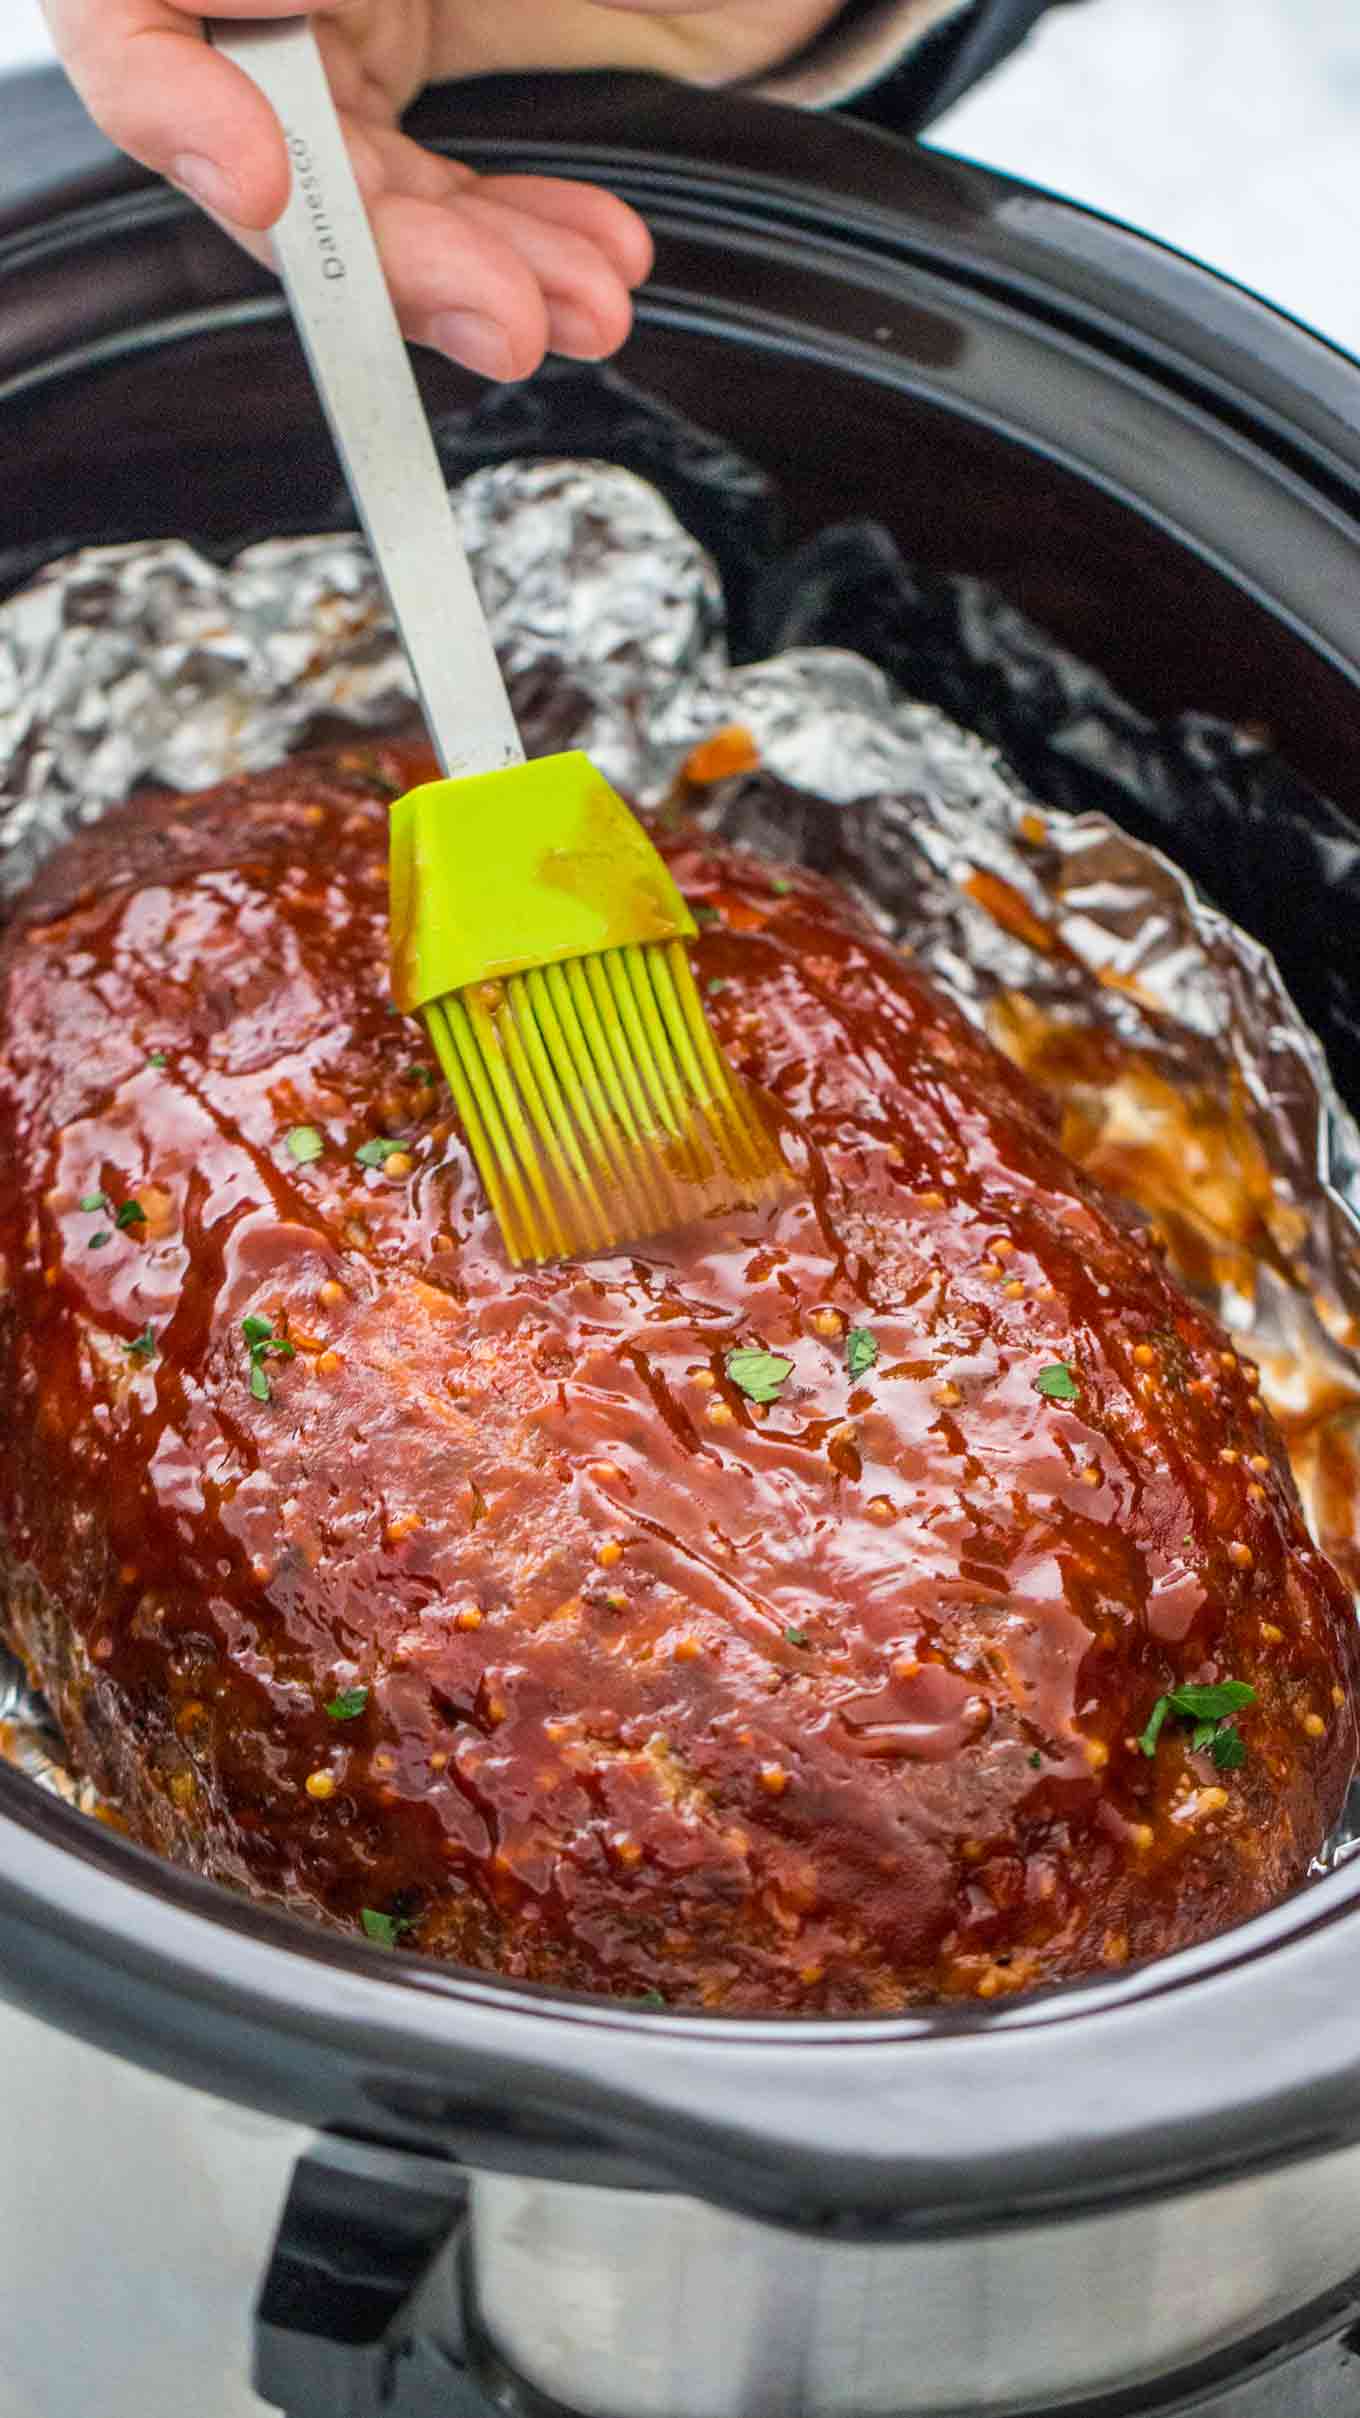 The Best Crockpot Meatloaf Video Sweet And Savory Meals,Sangria Recipe White Wine